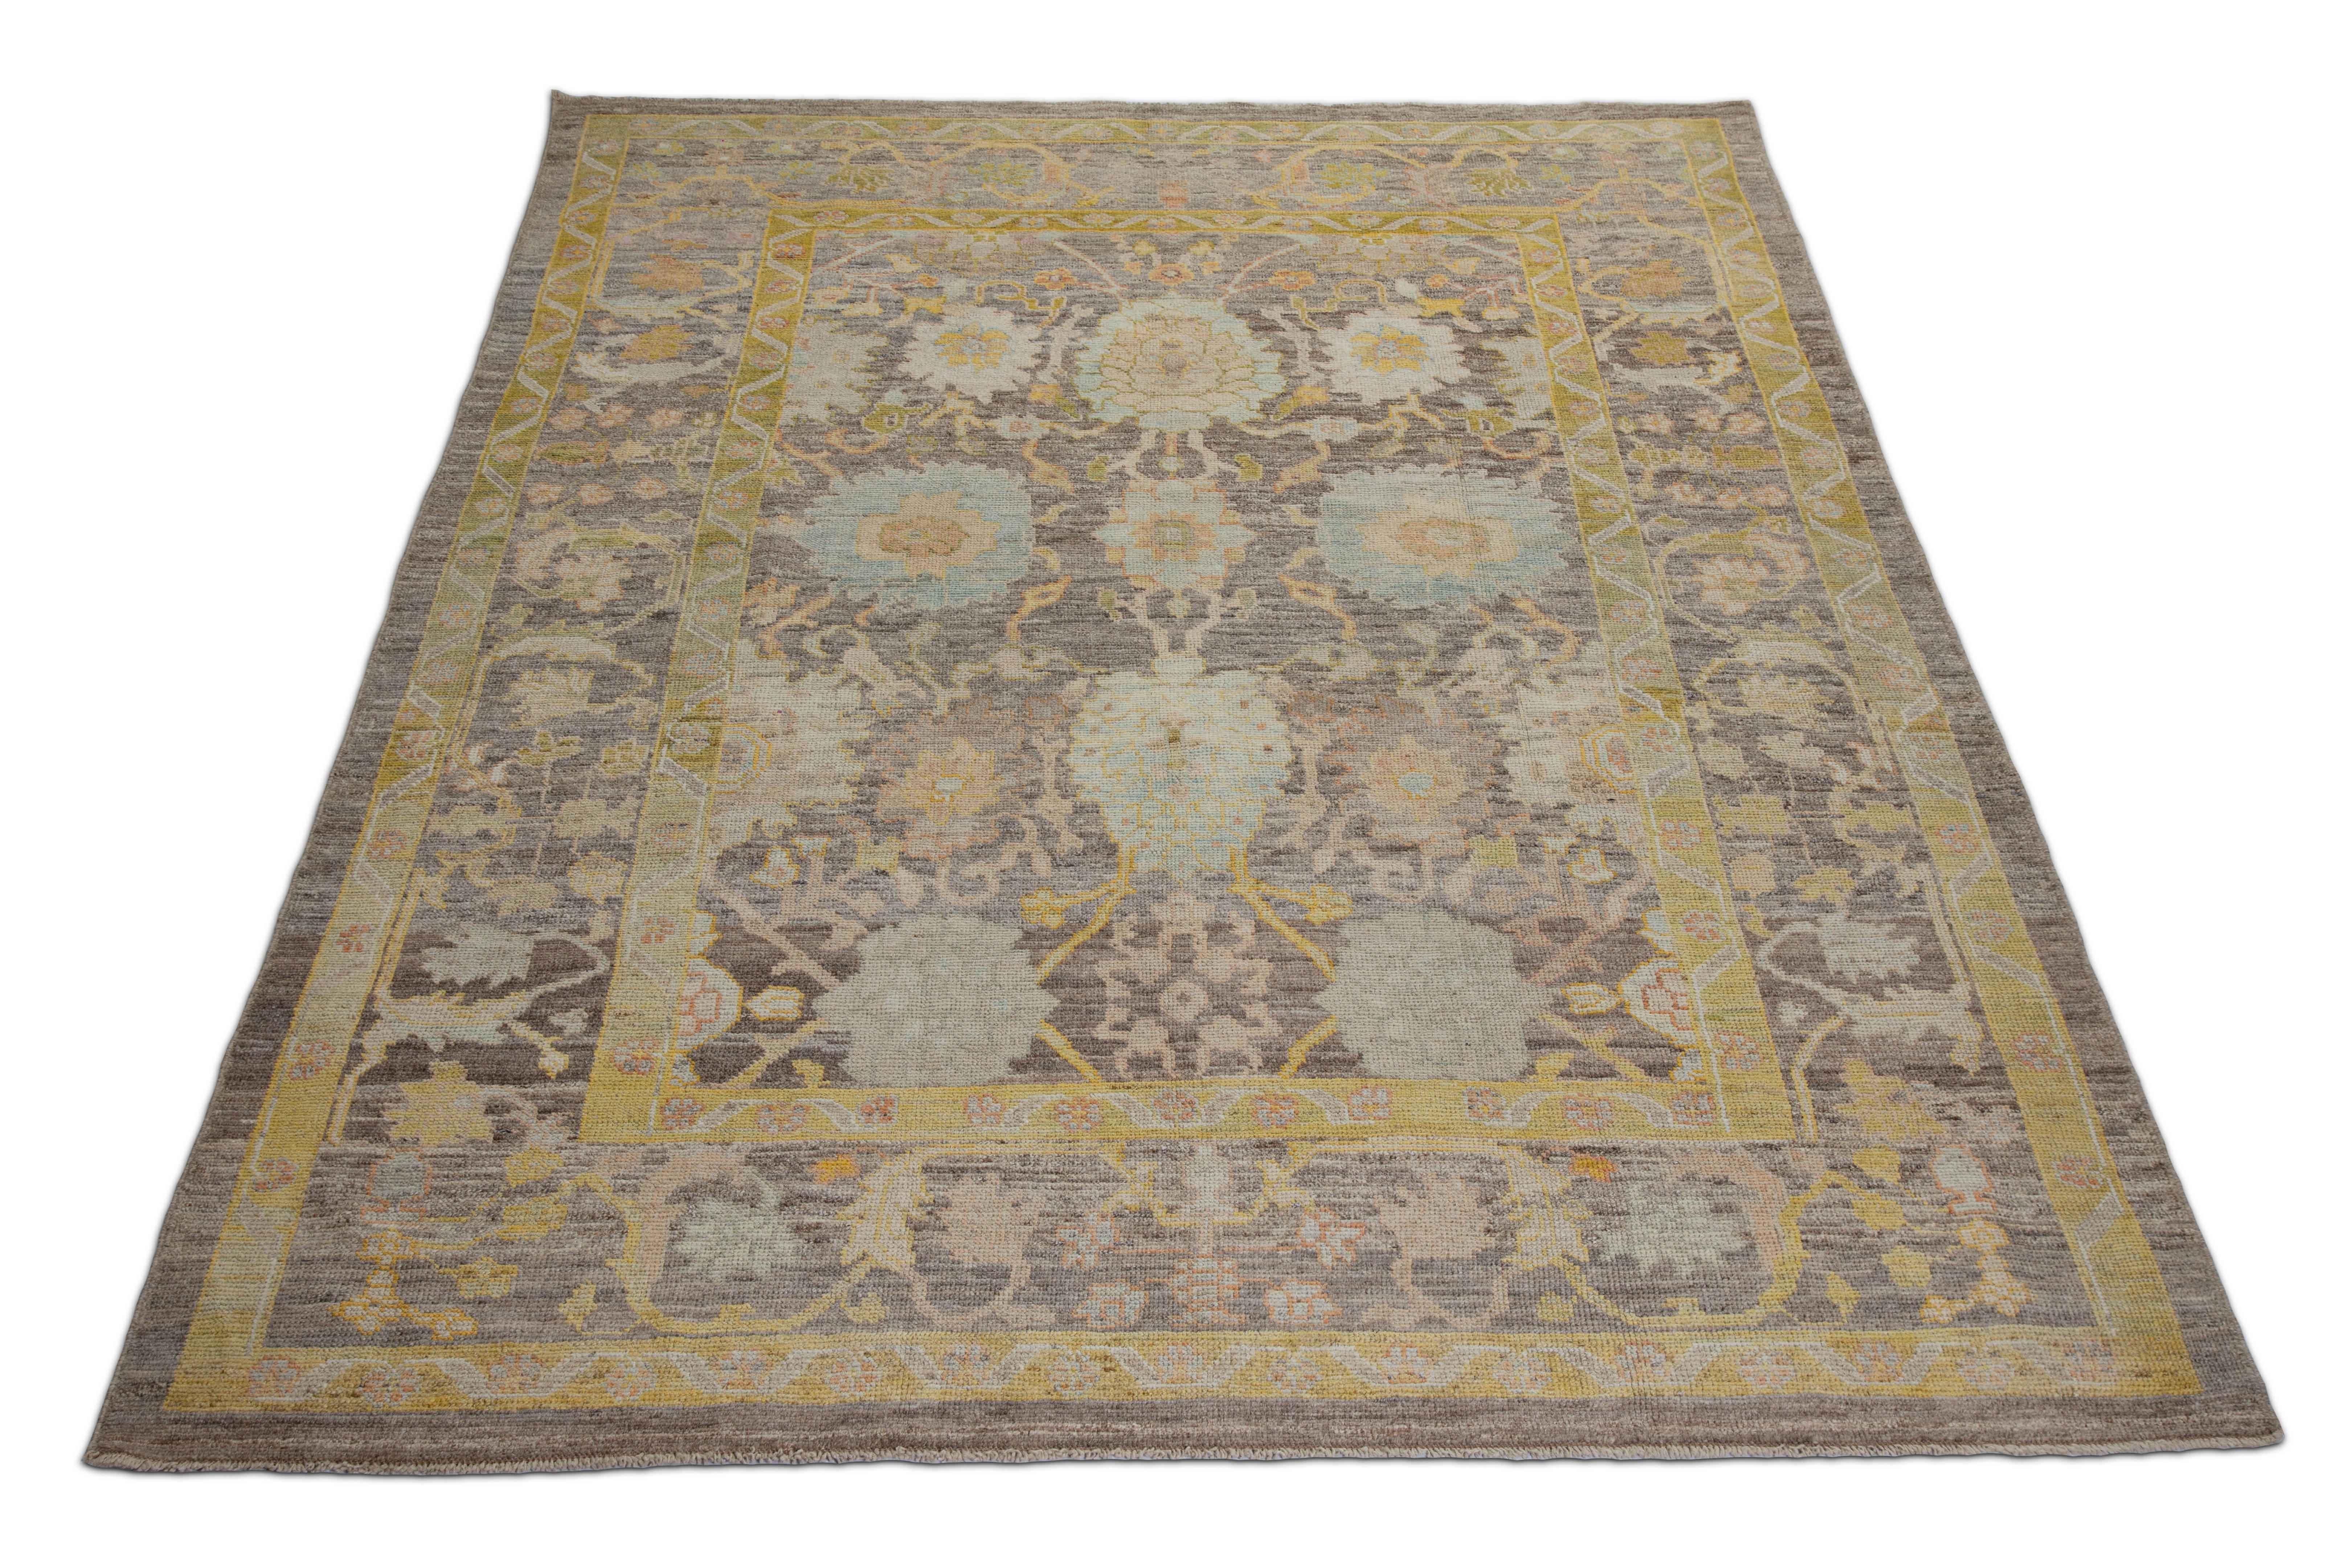 New Turkish rug made of handwoven sheep’s wool of the finest quality. It’s colored with organic vegetable dyes that are certified safe for humans and pets alike. It features a large, brown field with flower details allover associated with Oushak